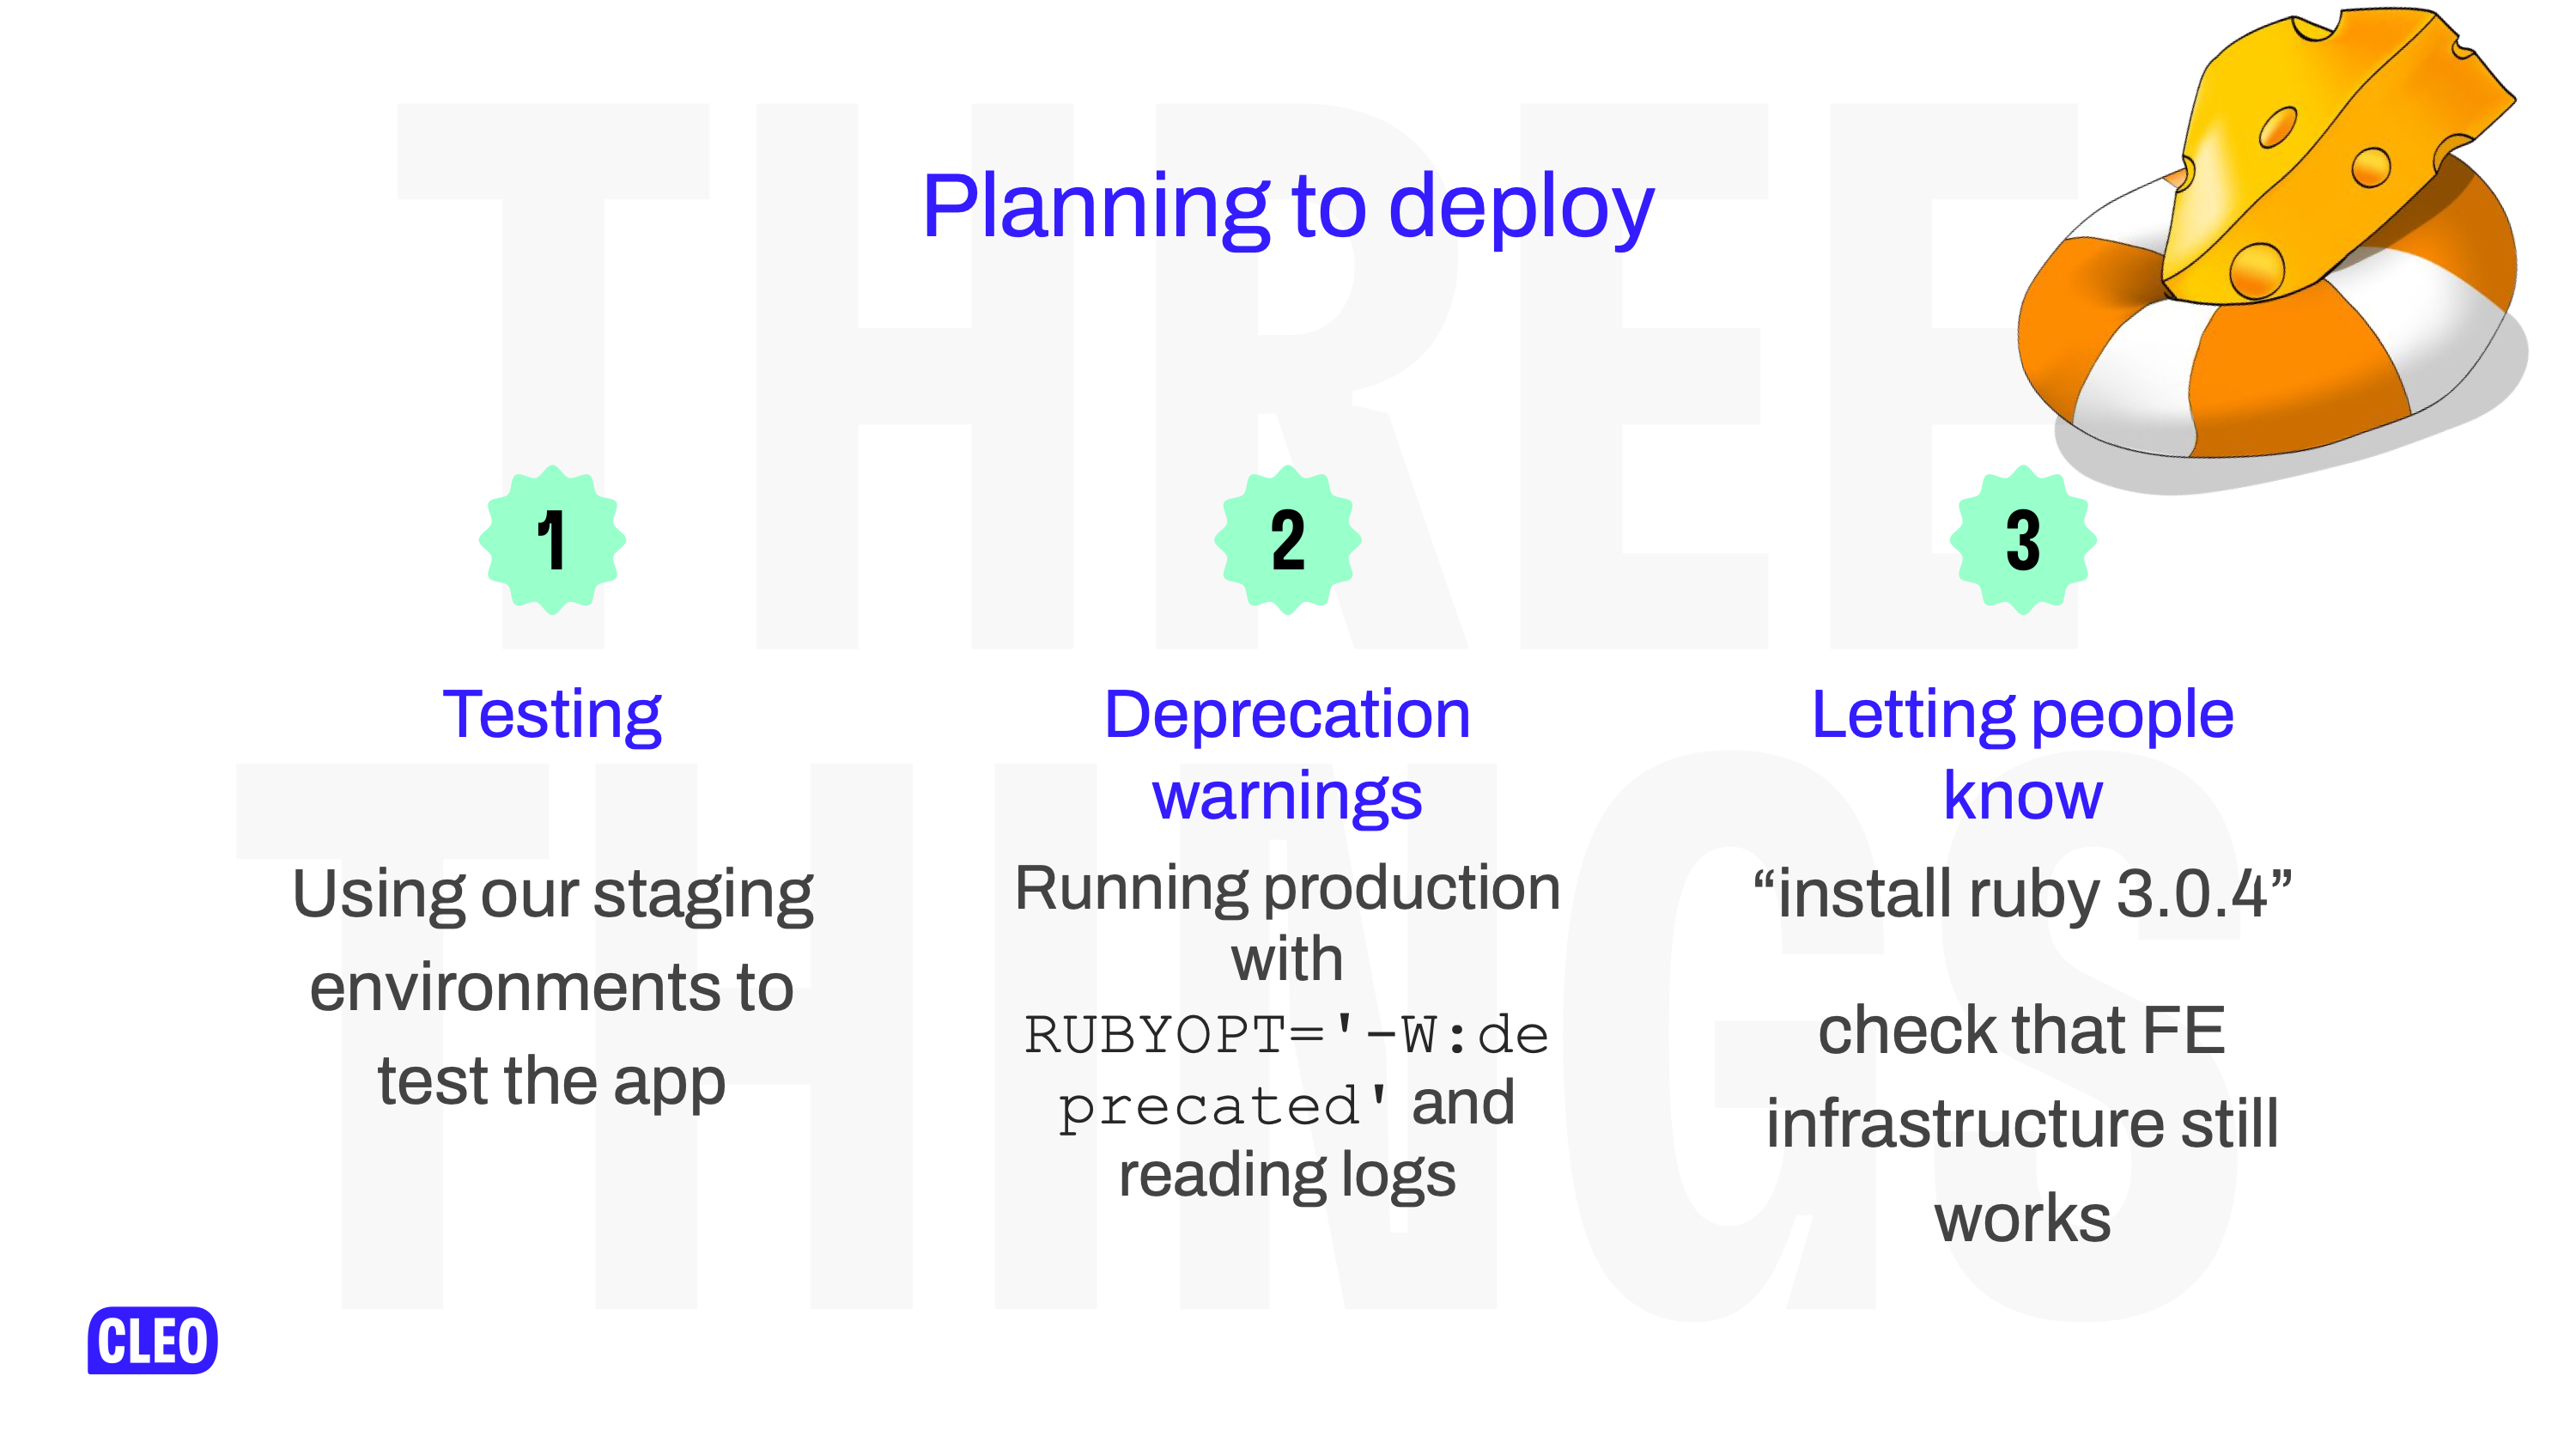 3 points explaining our process for working out if we could deploy the upgrade 1 - testing it worked, 2 - looking for more deprecation warnings, 3 - telling peopel about it; text: Planning to deploy, 1: Testing, Using our staging environments to test the app, 2: Deprecation warnings, Running production with `RUBYOPT=-W:deprecated` and reading logs, 3: Letting people know, install ruby 3.0.4, check that FE infrastructure still works